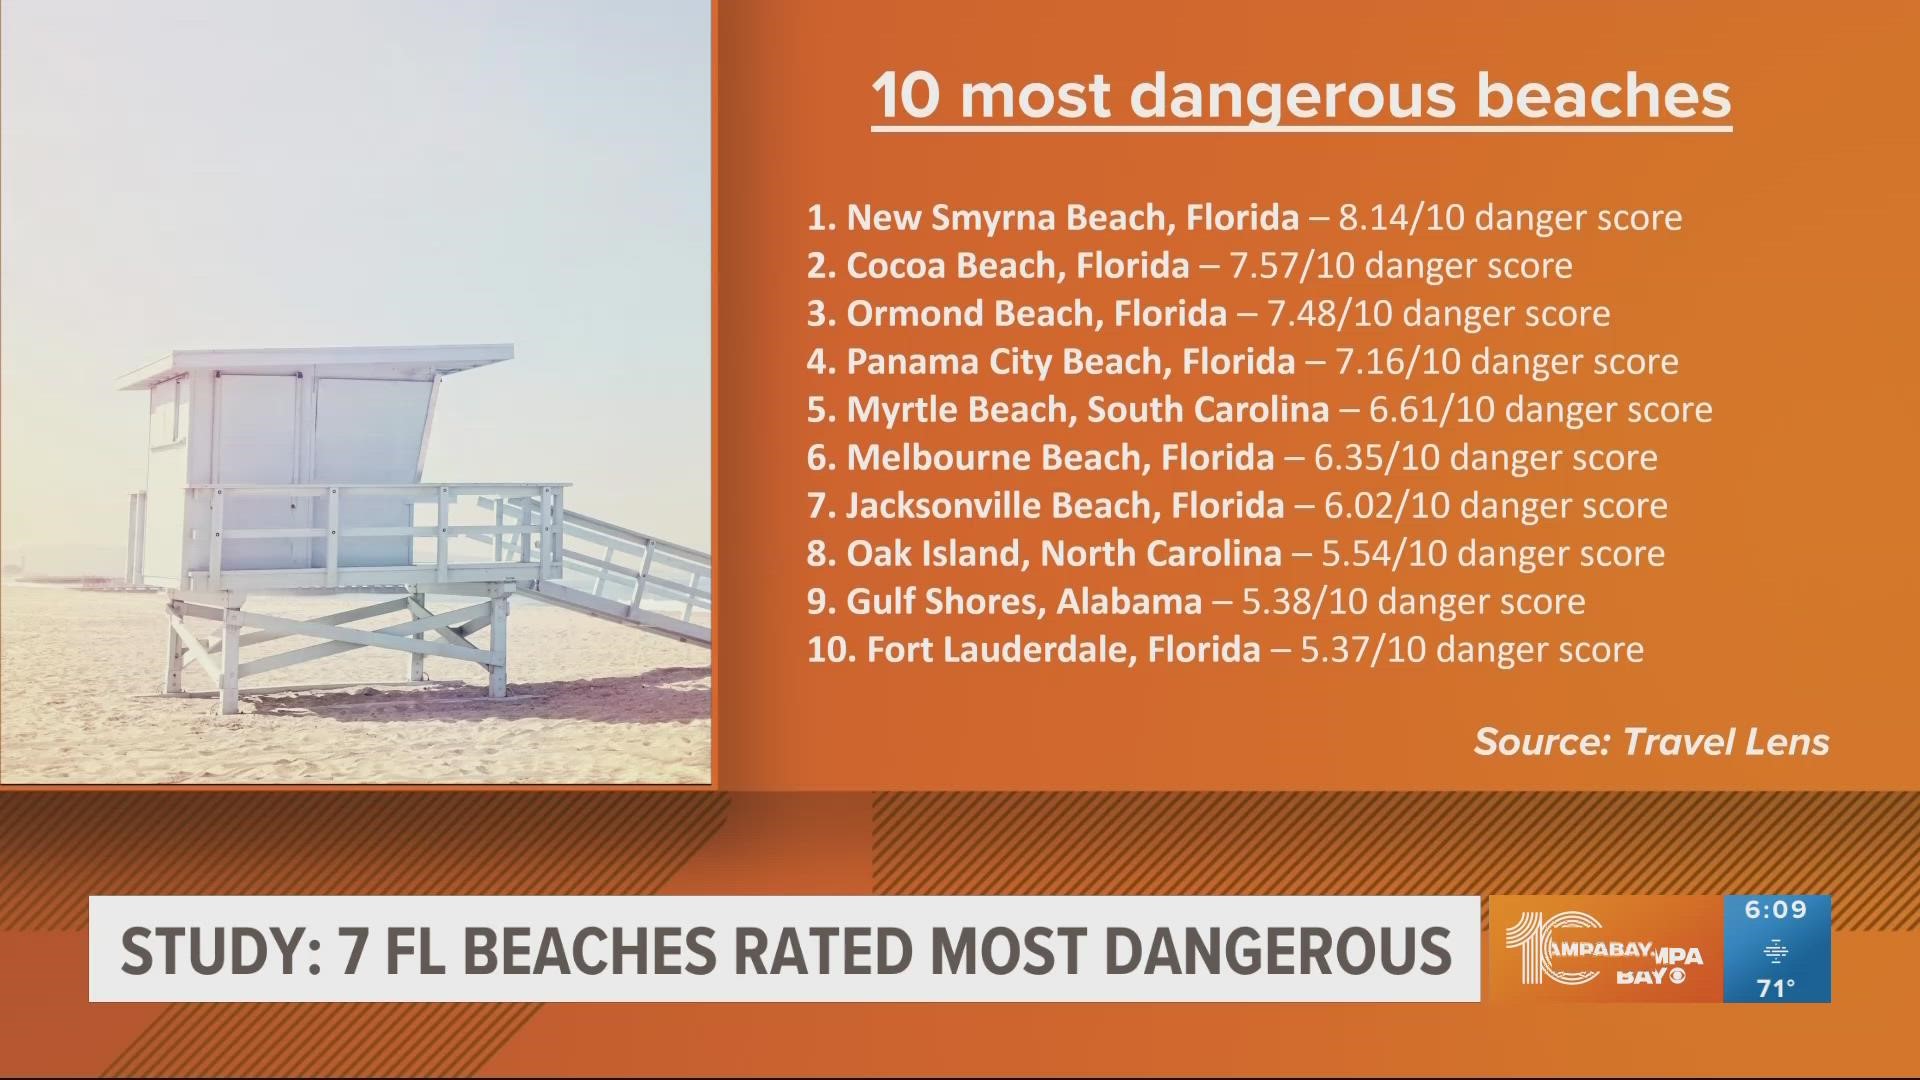 The beaches were selected based on factors including surf zone fatalities, shark attacks and the number of hurricanes.